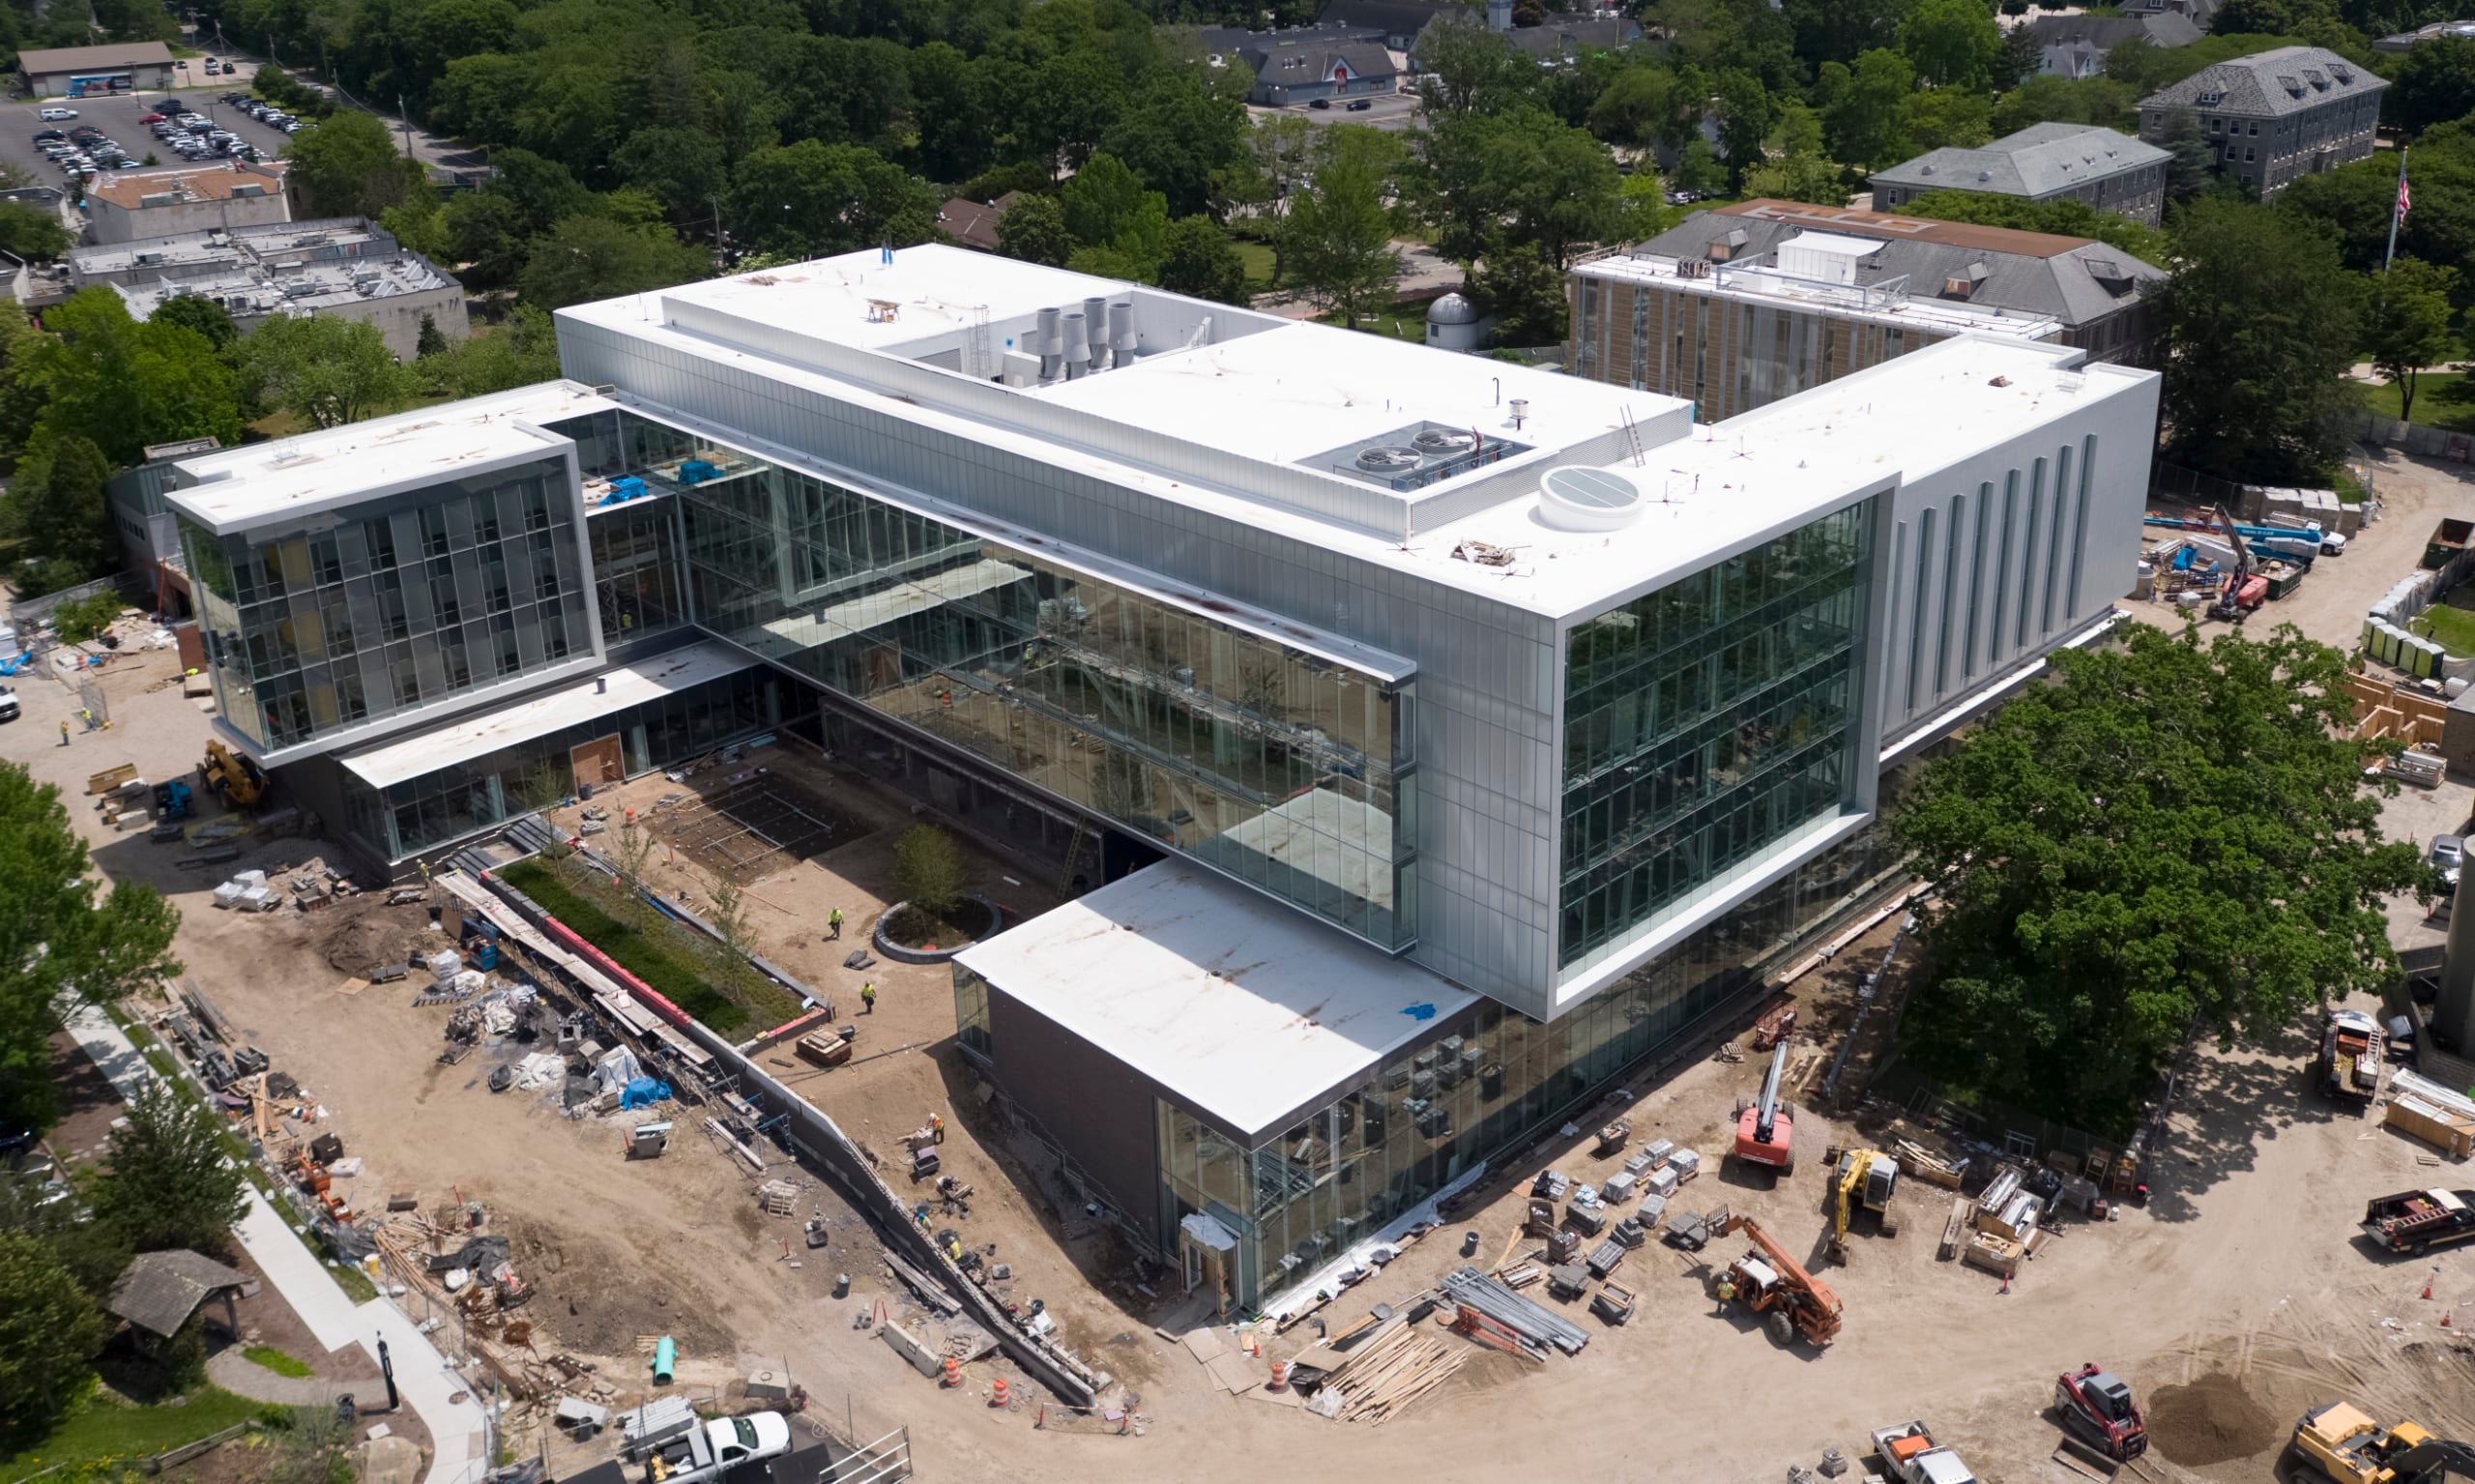 The Fascitelli Center for Advanced Engineering under construction in summer 2019